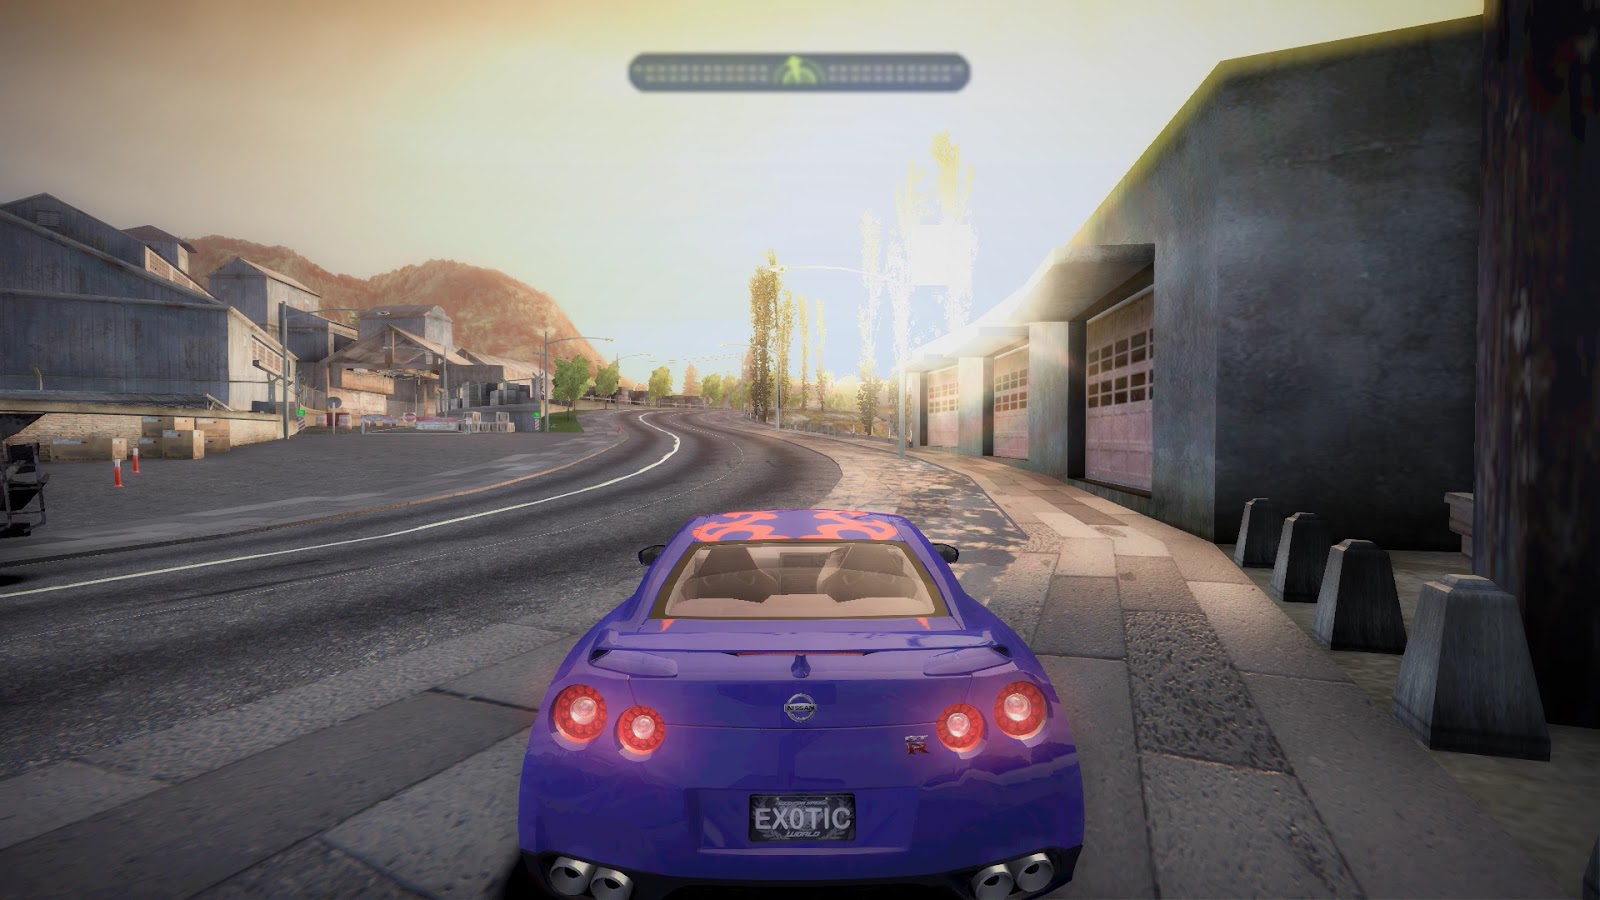 Nfs Most Wanted Mod Apk Download